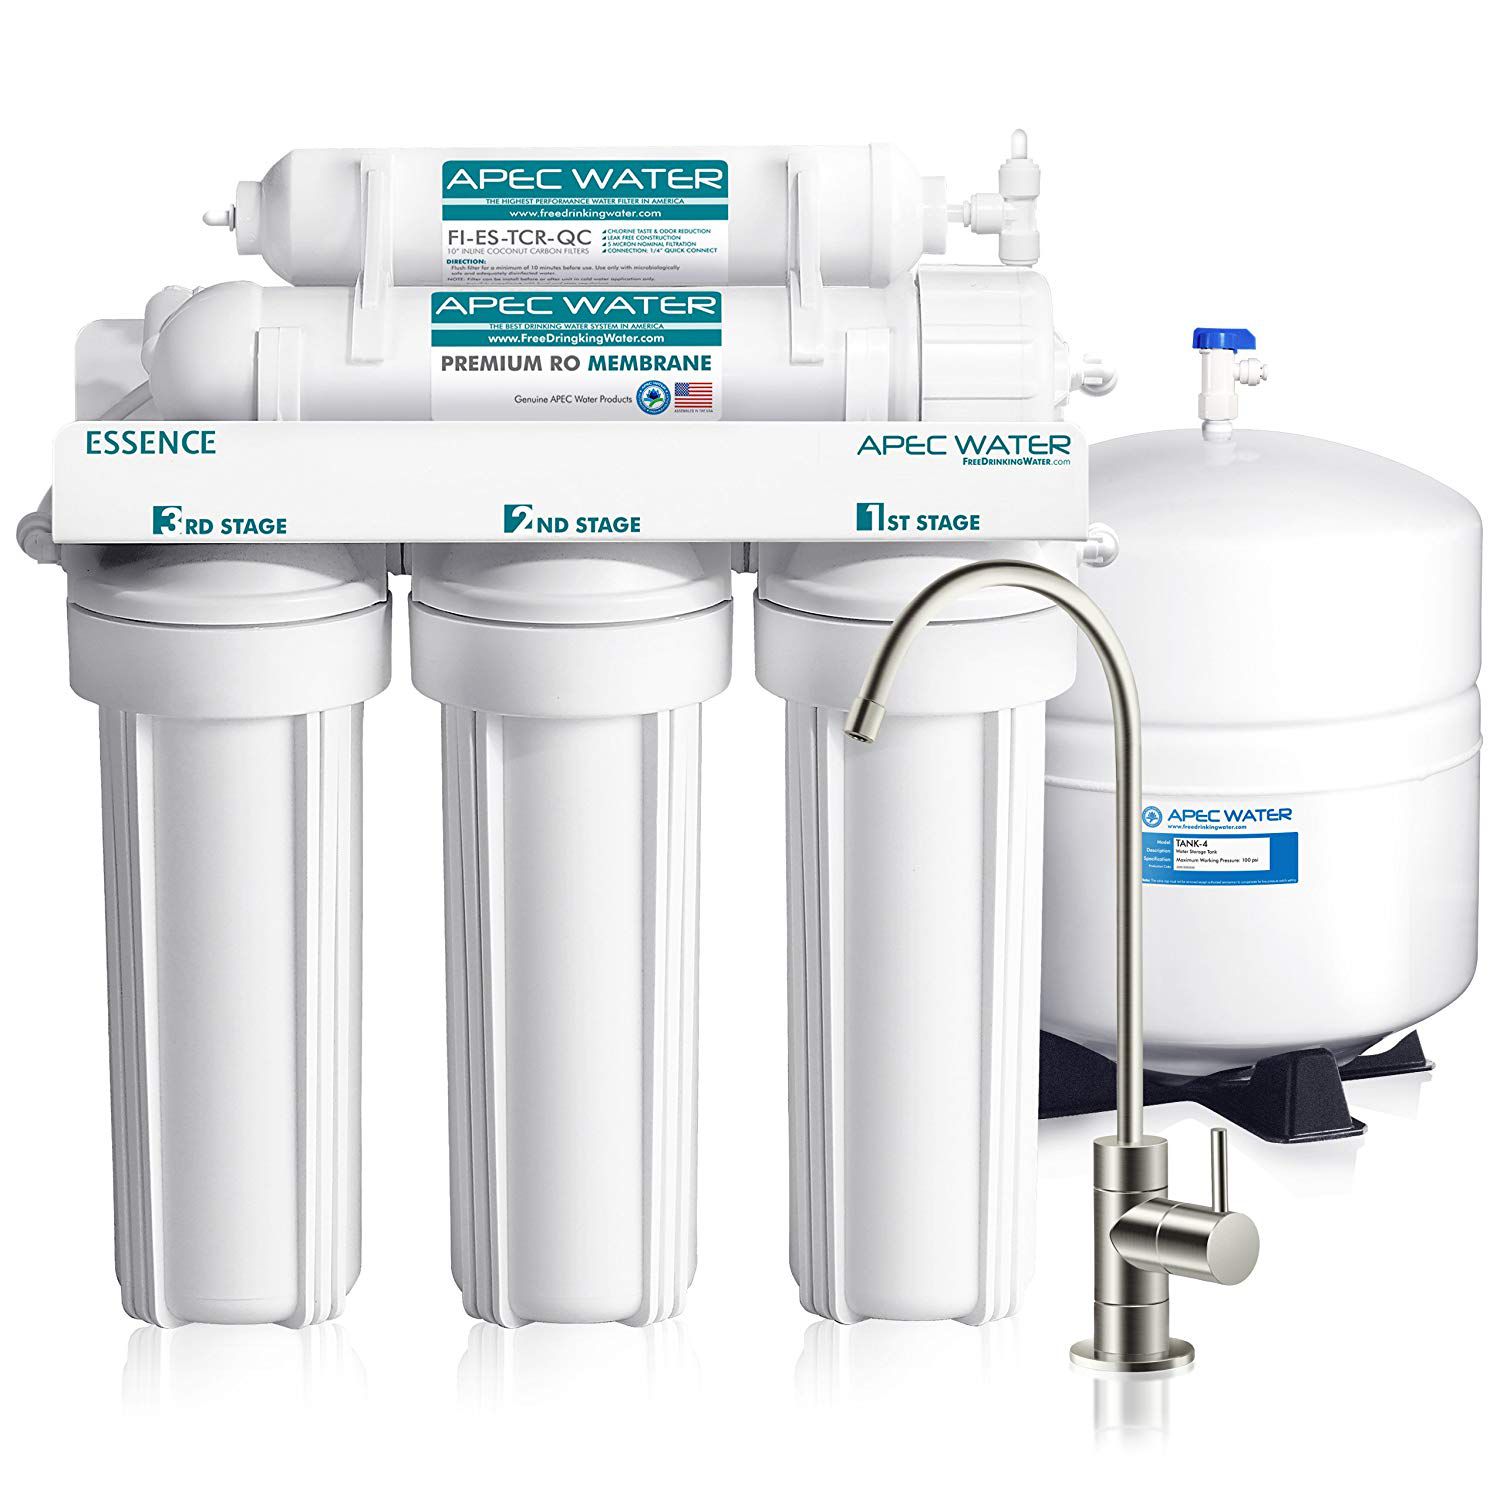 The ultimate checklist for the purchase of a home water filter